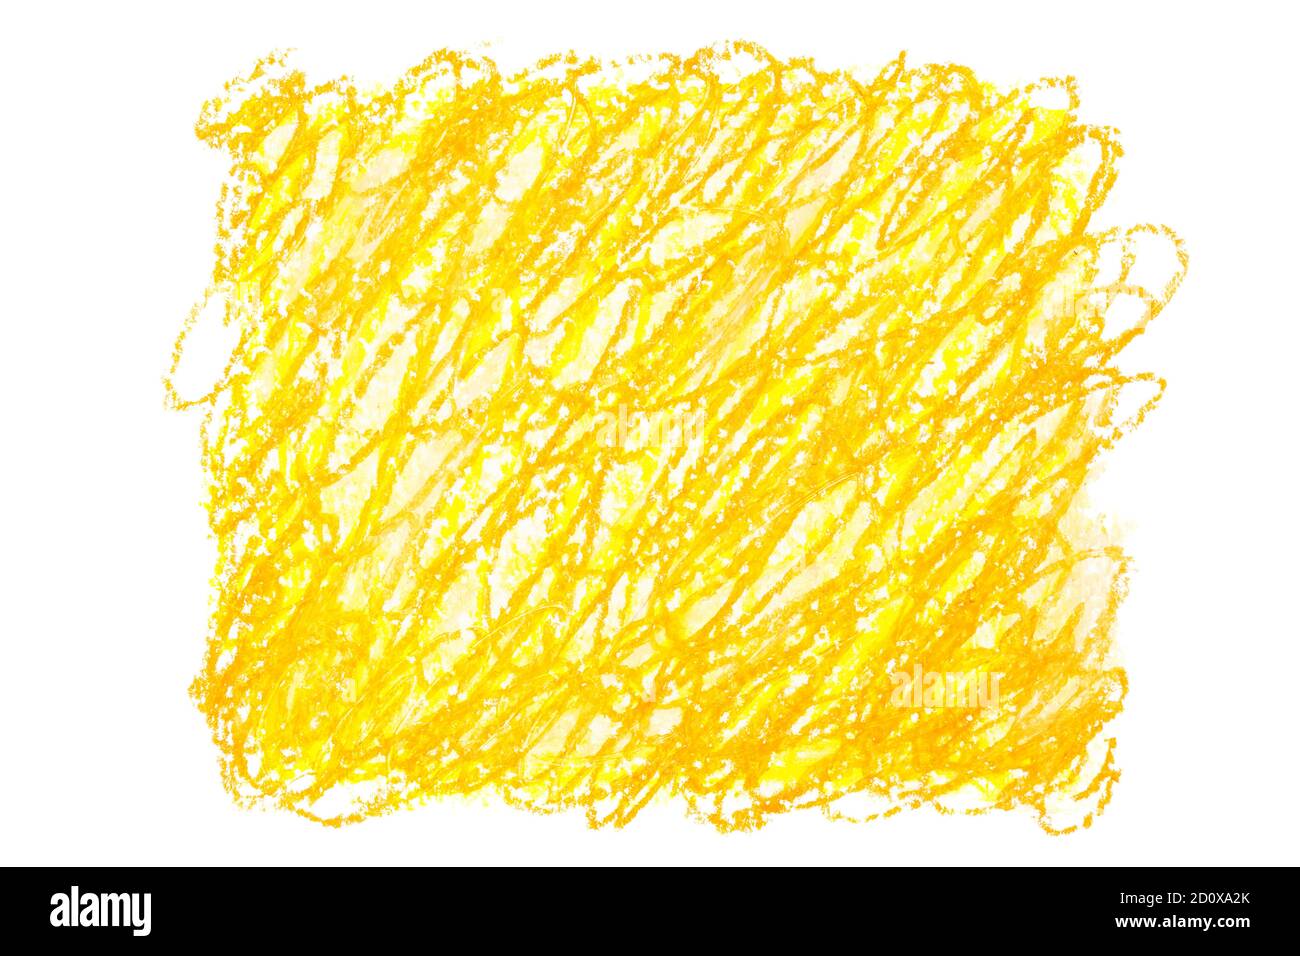 Crayon doodle background. Yellow orange oil pastel rectangle by scratches isolated on the white background.  Hand drawn texture Stock Photo